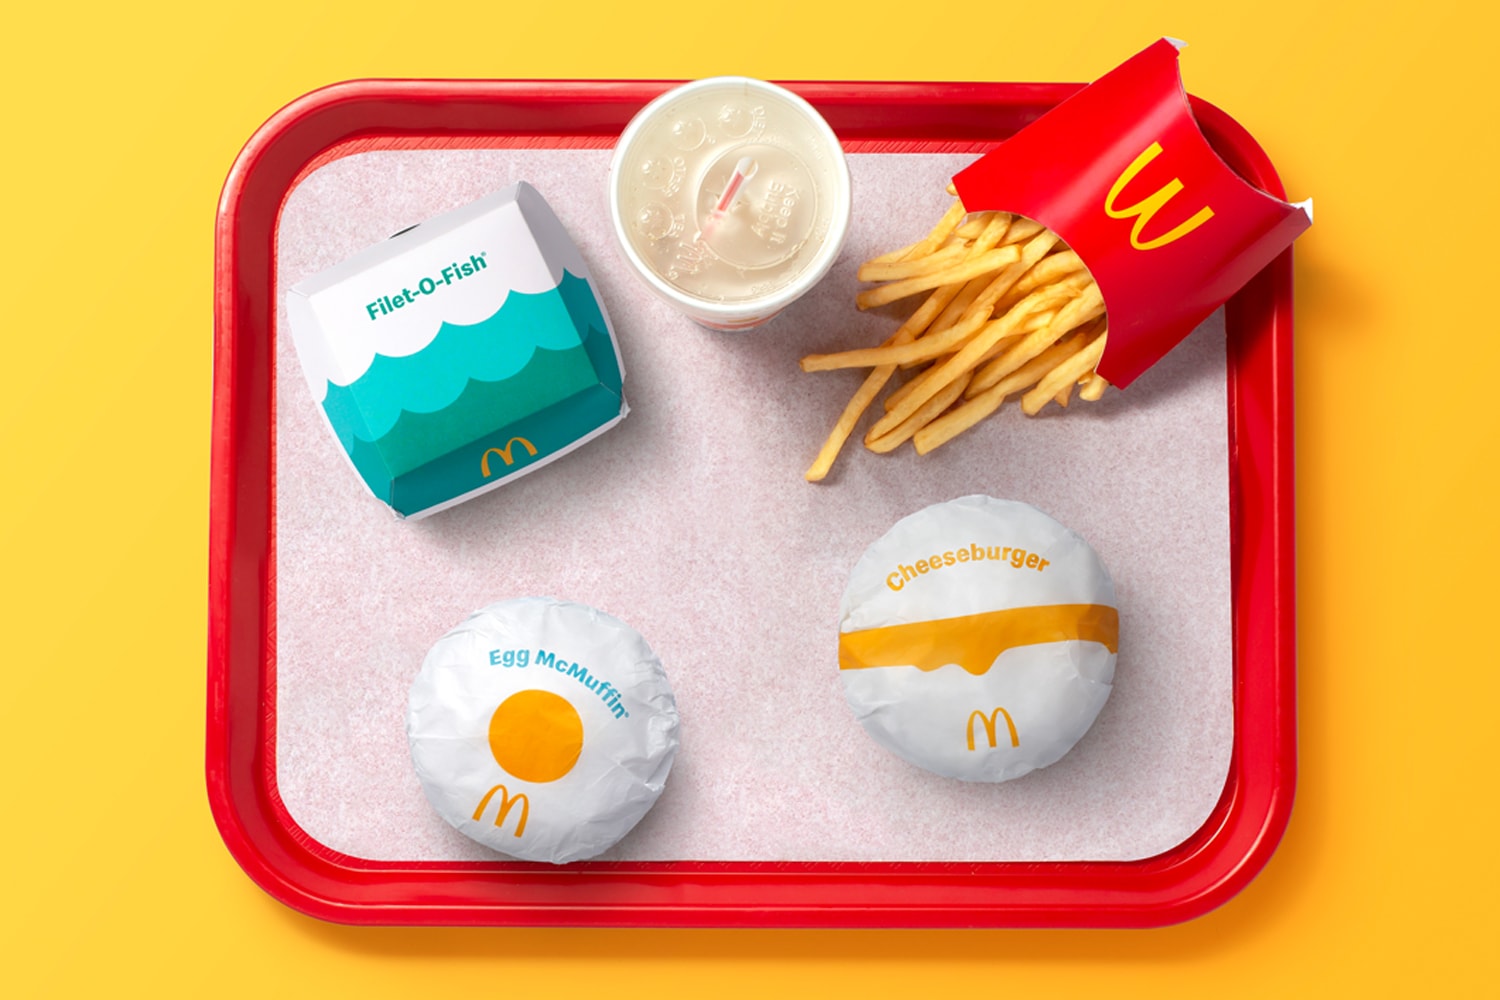 McDonald's Global Packaging Redesign Pearlfisher Info Filet-O-Fish Quarter Pounder with Cheese Egg McMuffin Cheese Burger Big Mac Fries McFlurry